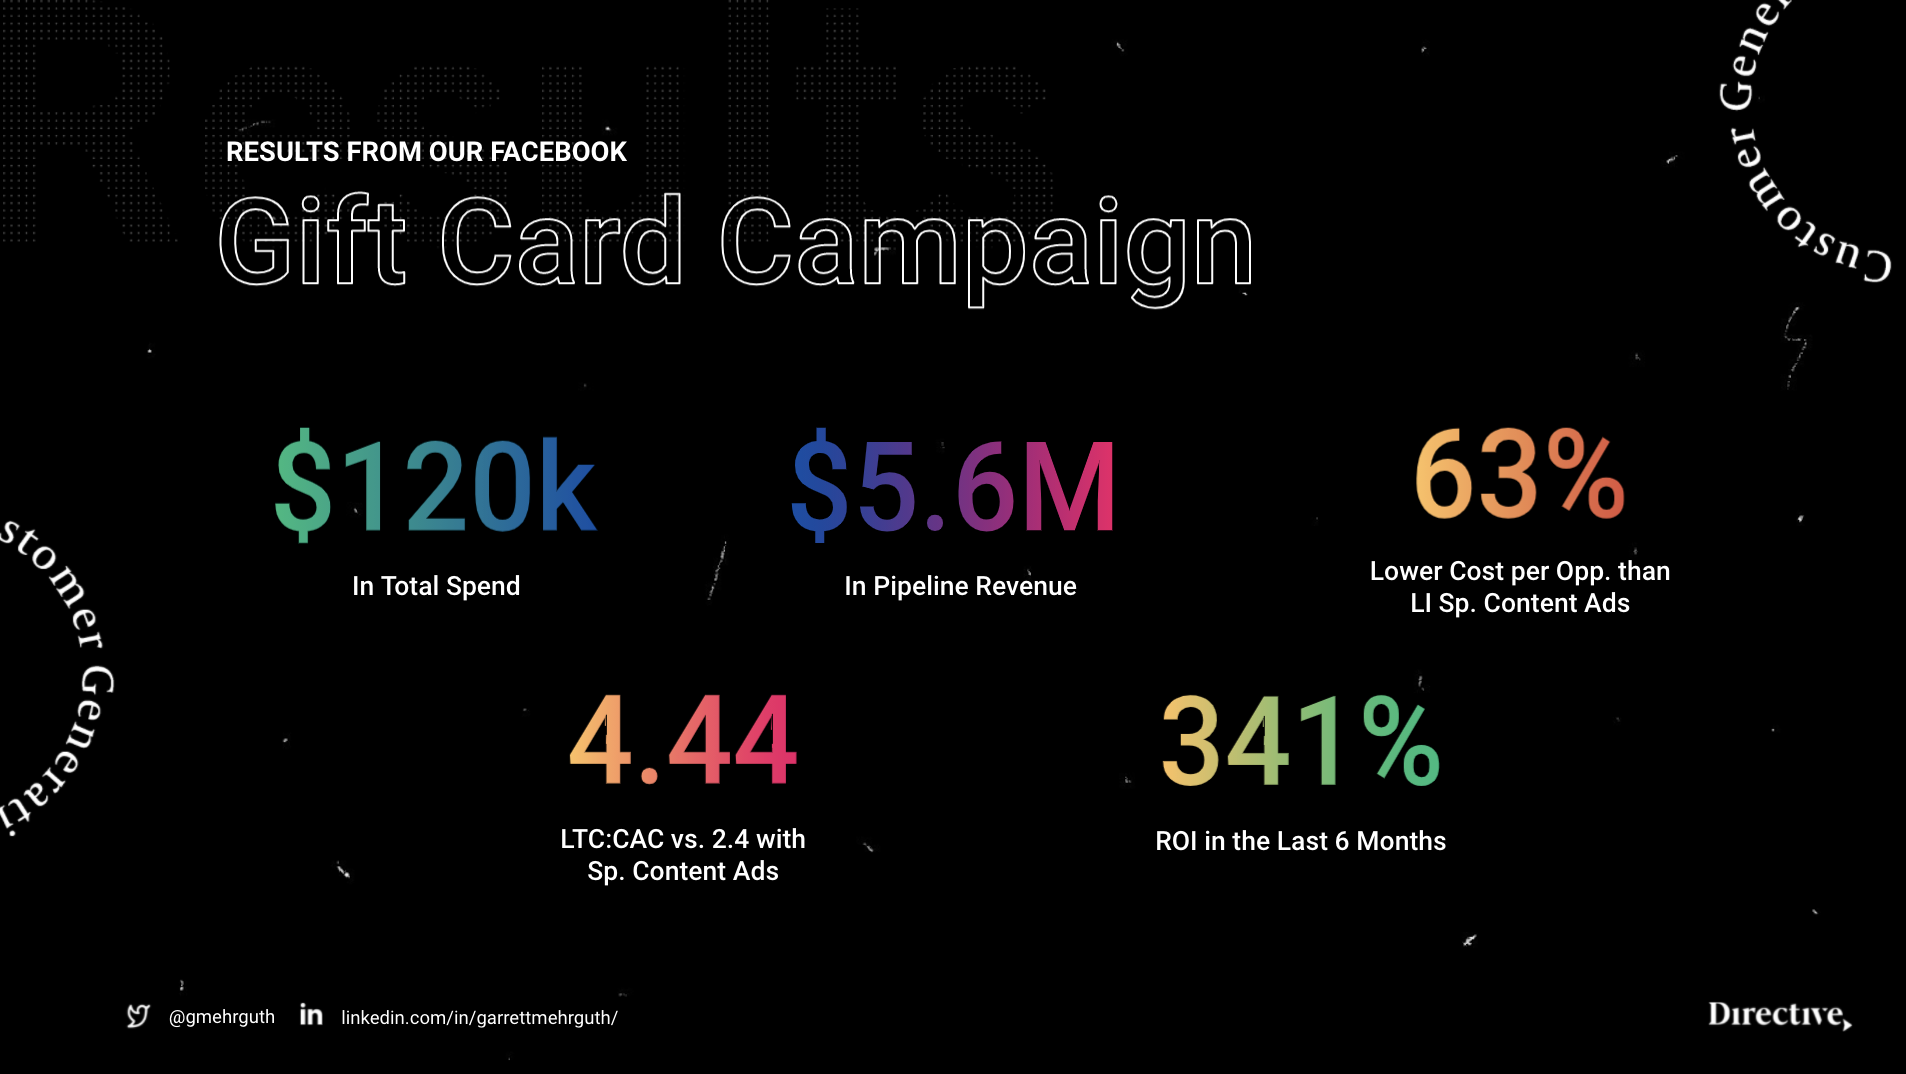 Directive Consulting gift card campaign results